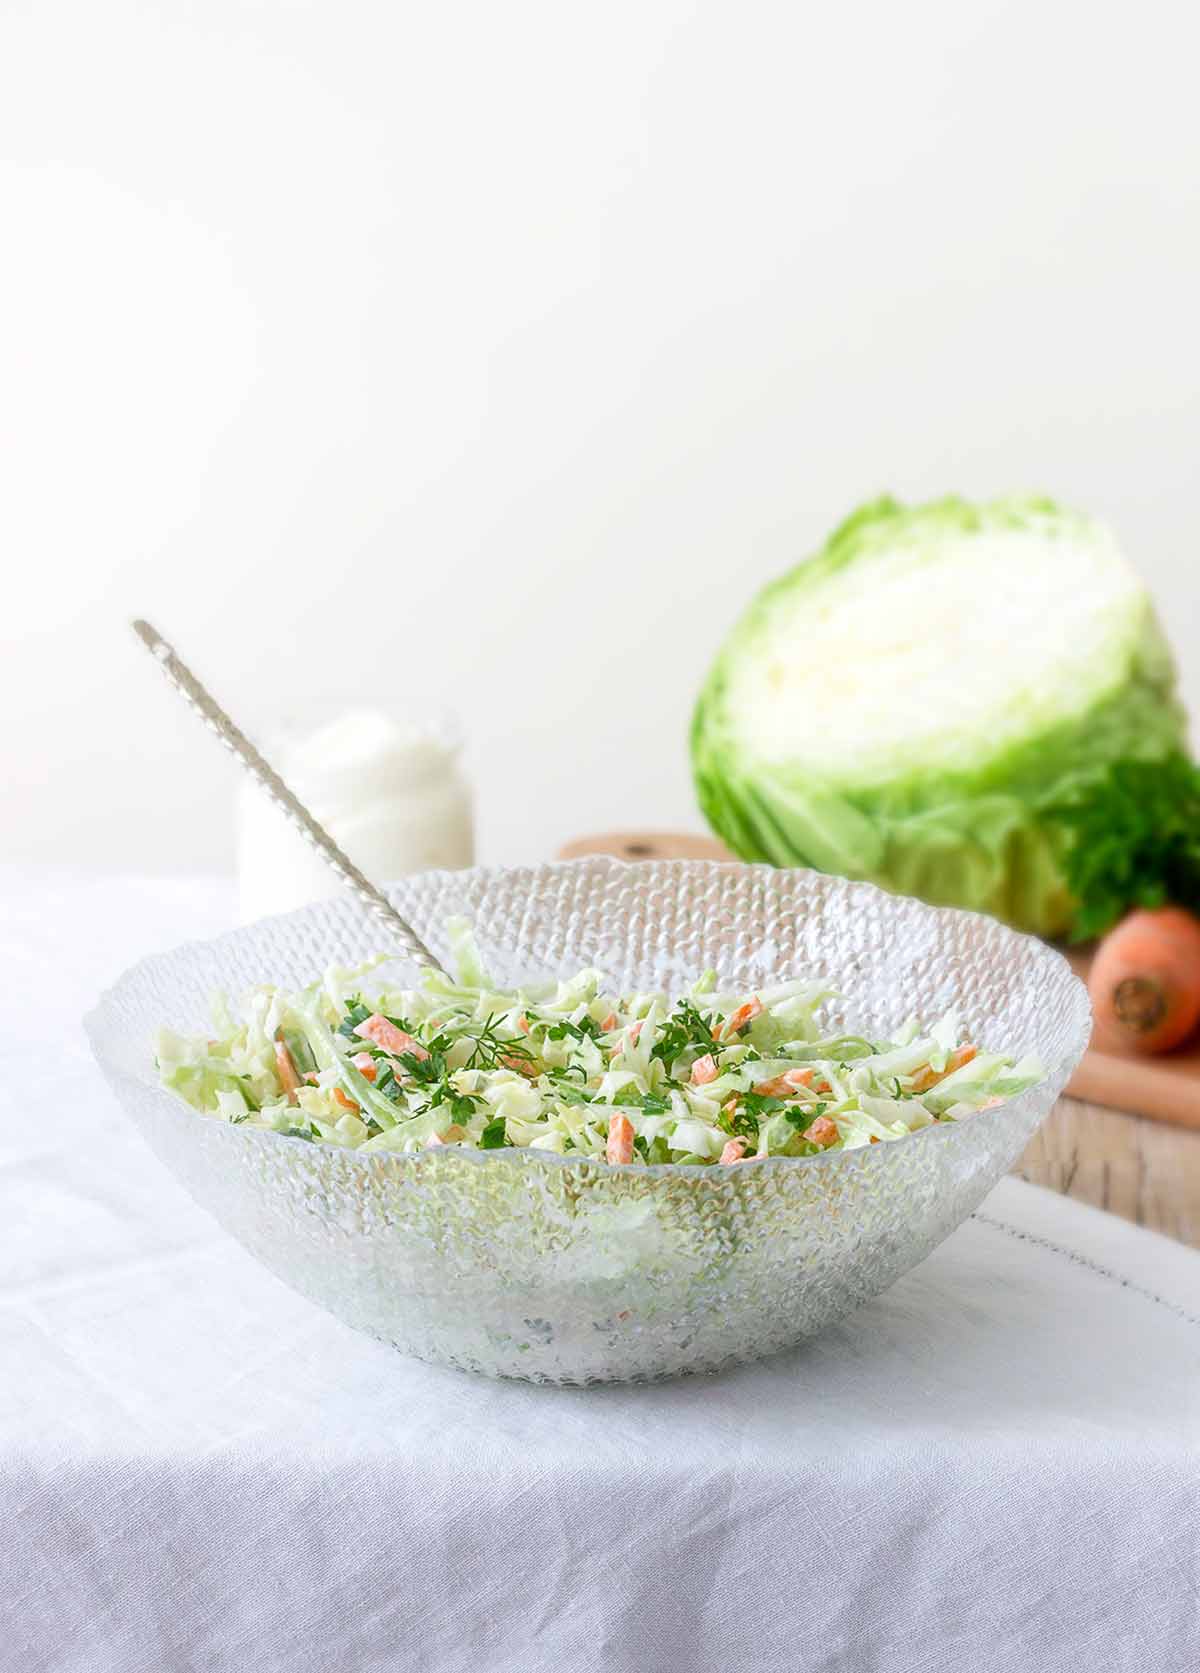 Glass bowl with lime coleslaw--green cabbage, carrots, lime zest, mayo, and parsley--on a tablecloth, cabbage and carrots behind